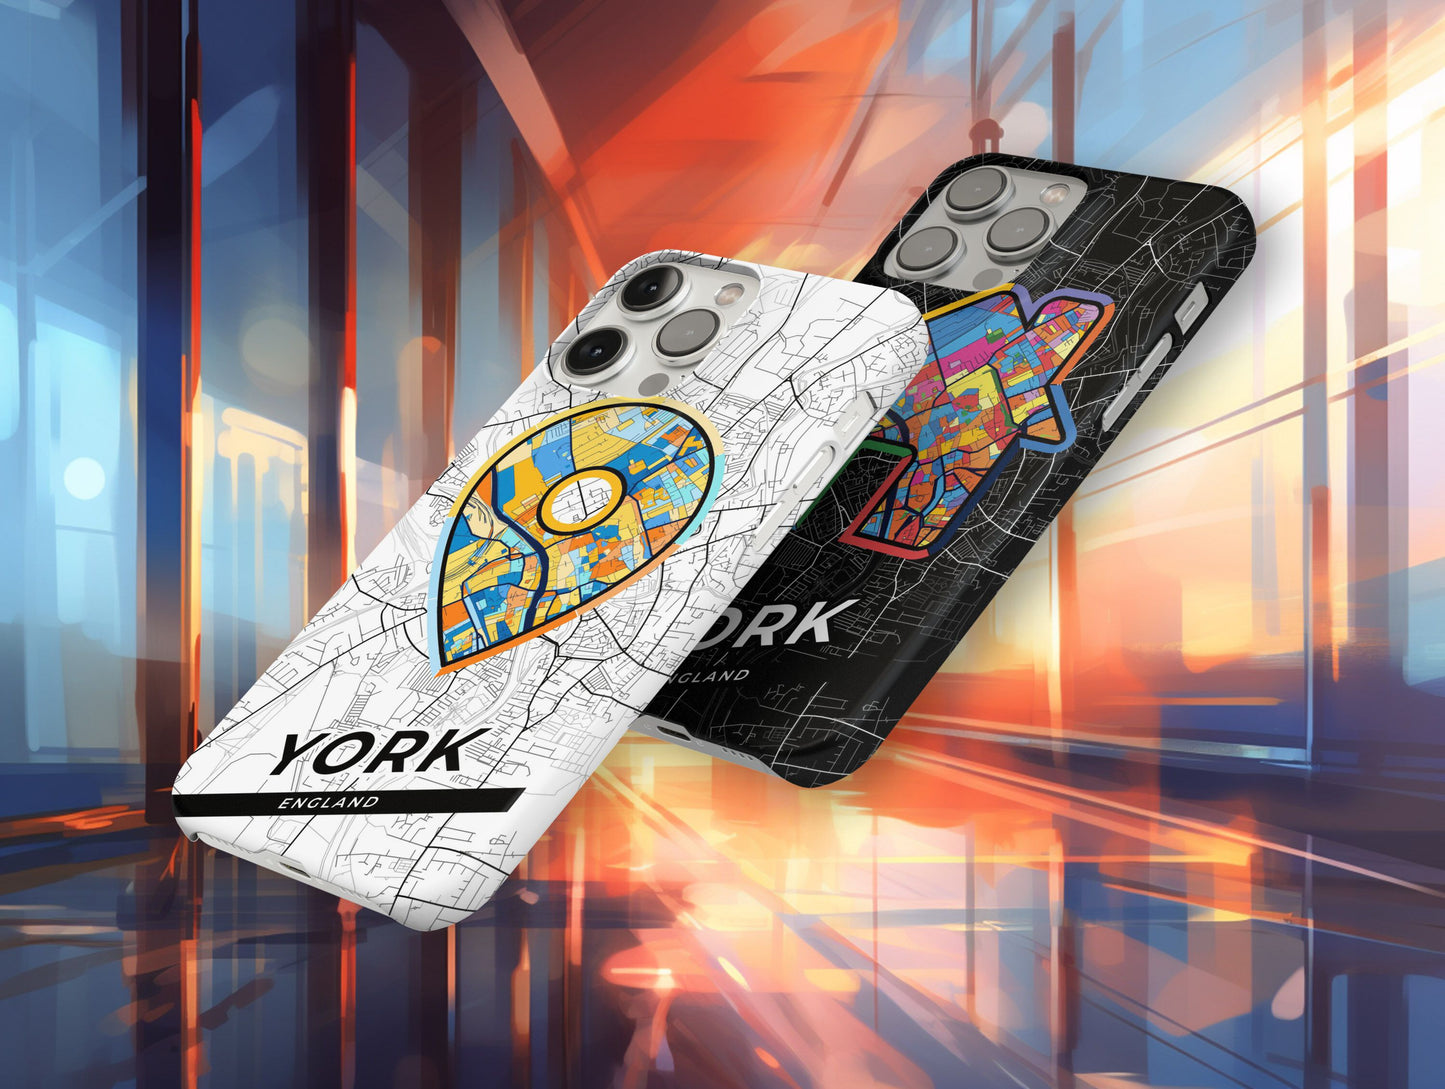 York England slim phone case with colorful icon